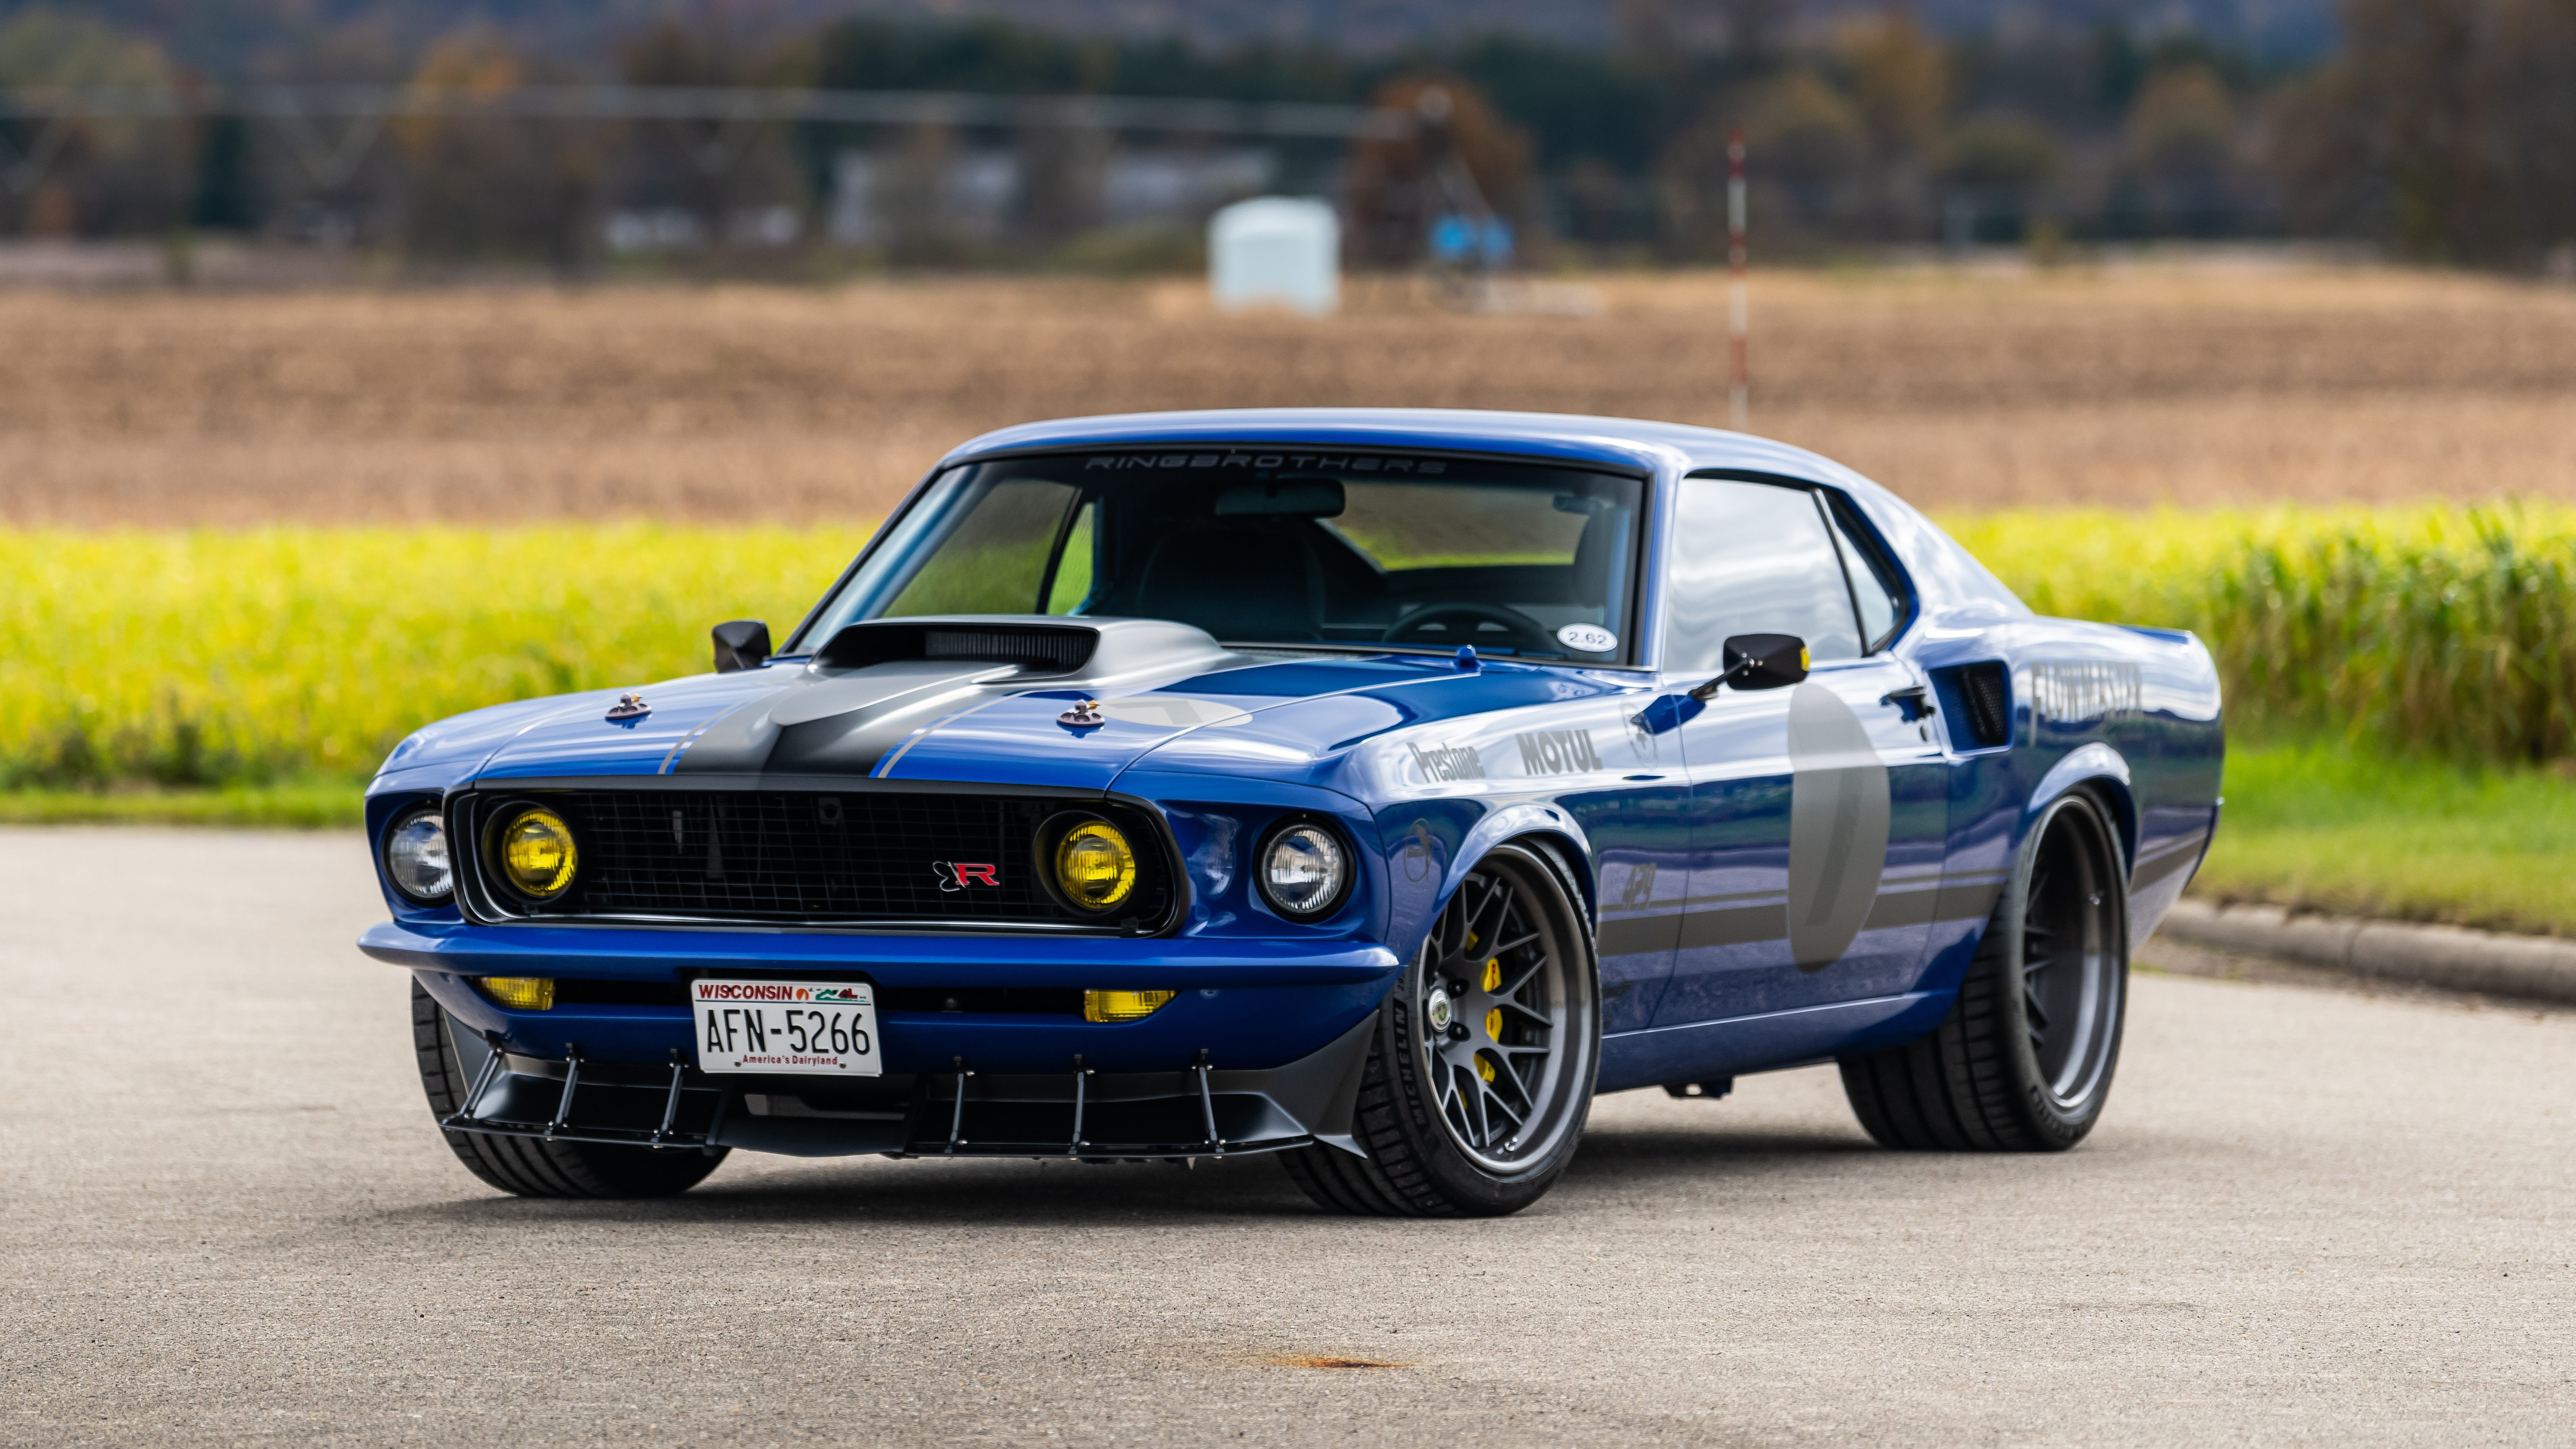 Ford Mustang Mach 1 Wallpaper 4K 8K Muscle cars 5K Classic cars 9860